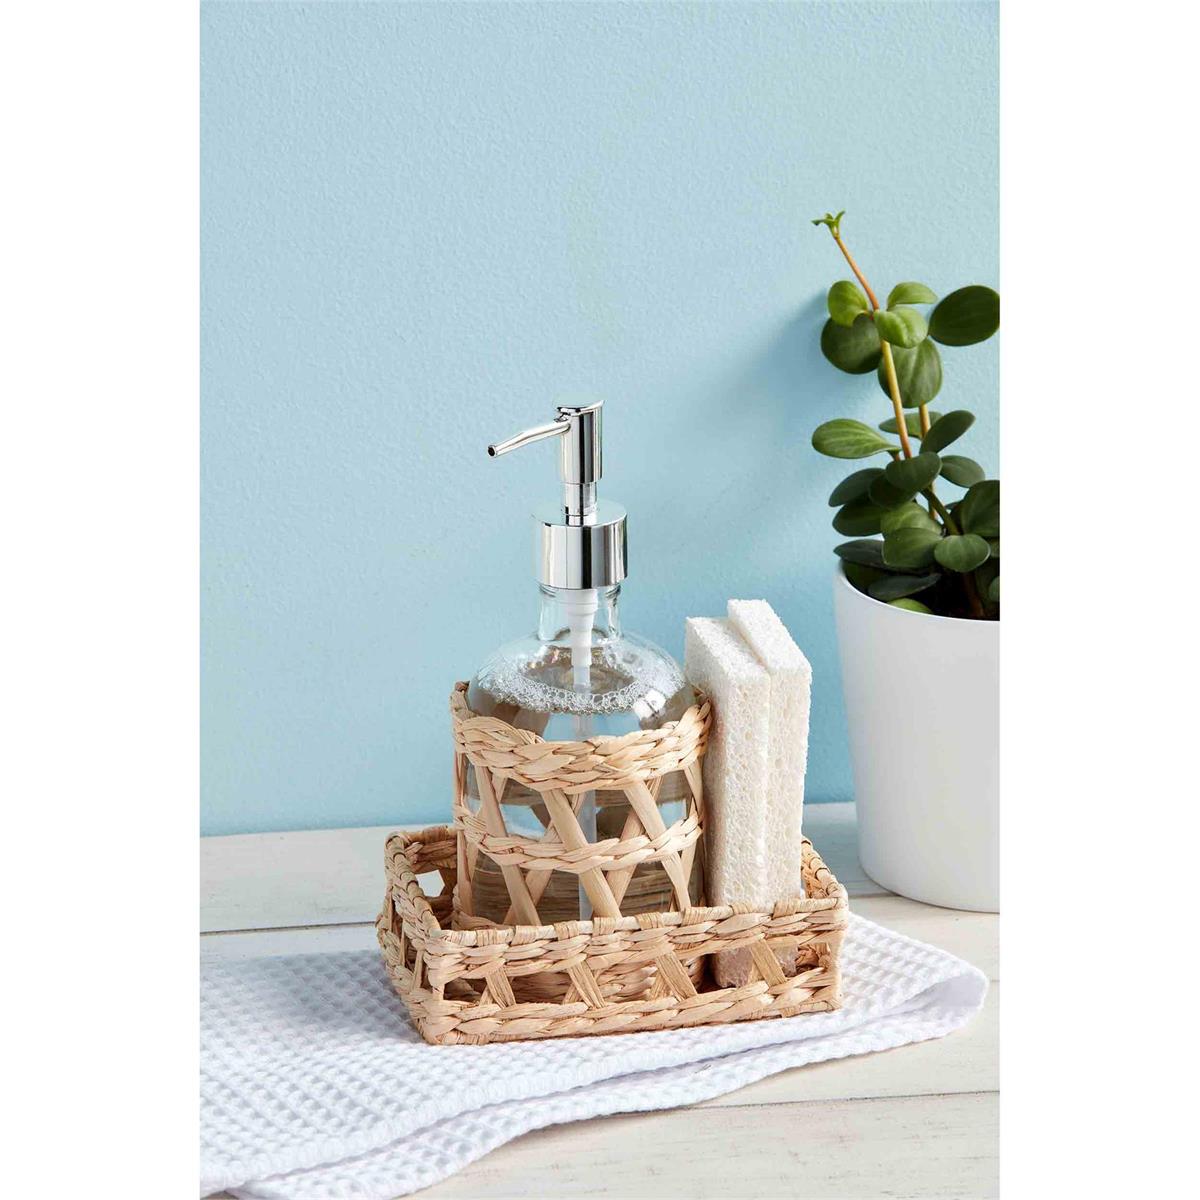 Woven Tray & Soap Pump Set by Mud Pie